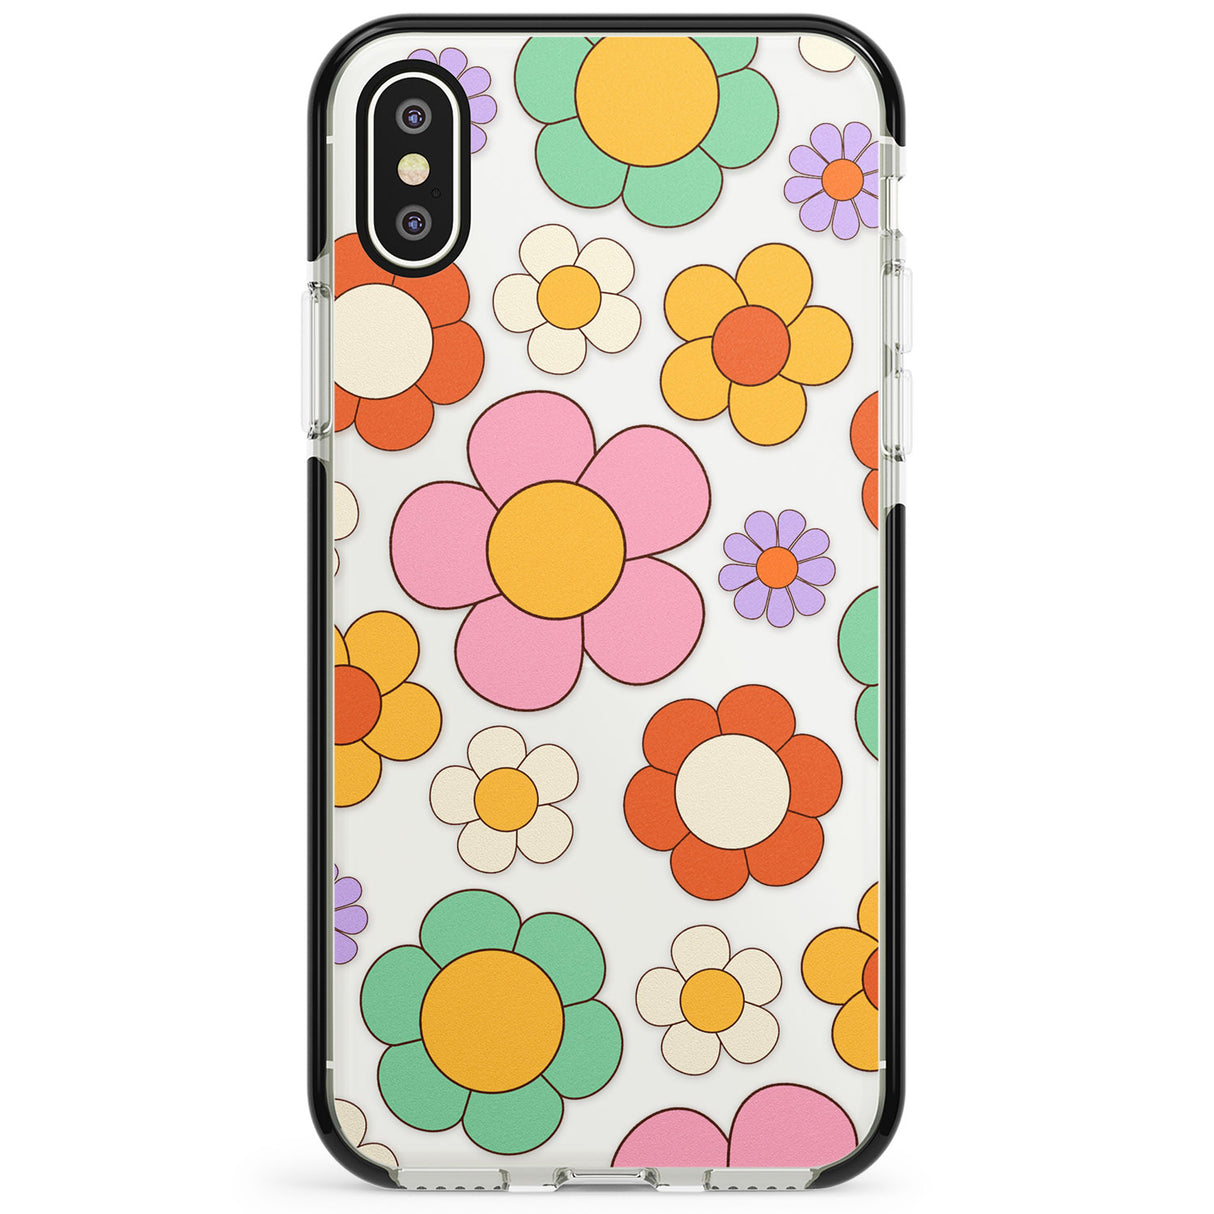 Groovy Blossoms Phone Case for iPhone X XS Max XR